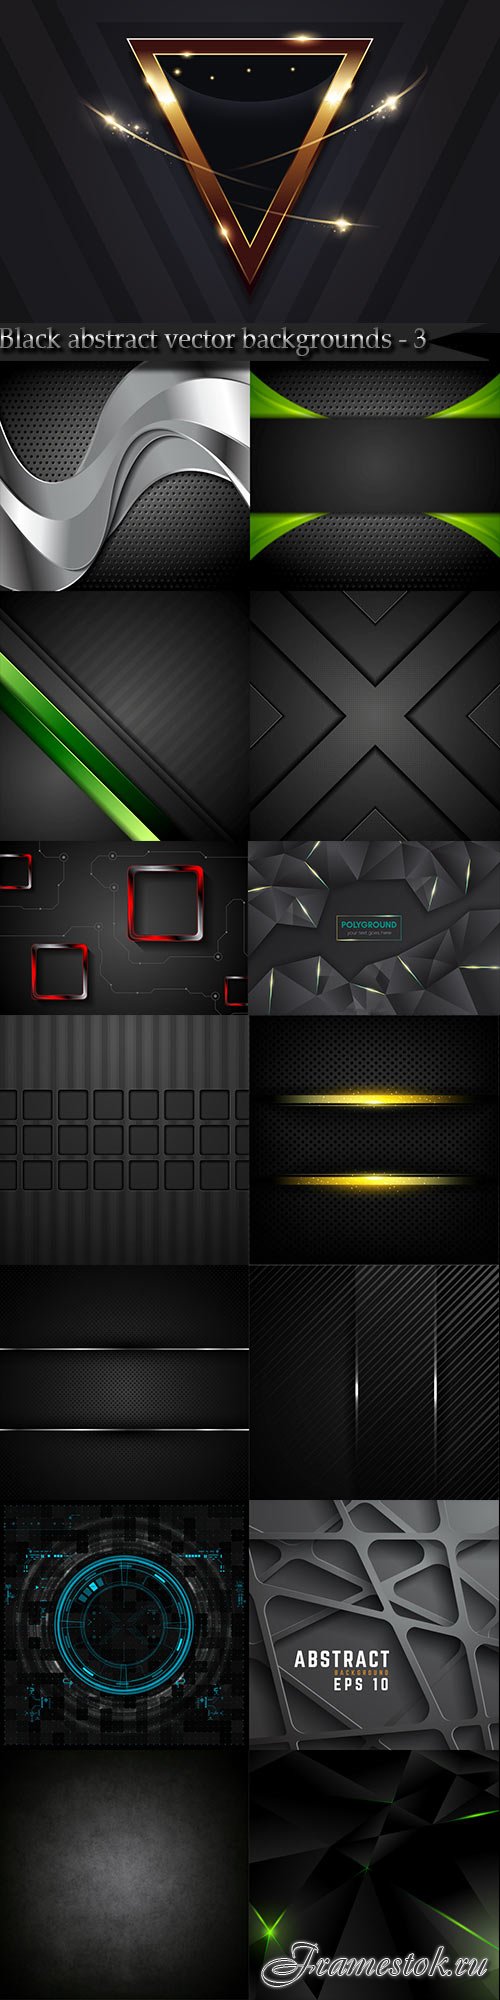 Black abstract vector backgrounds - 3